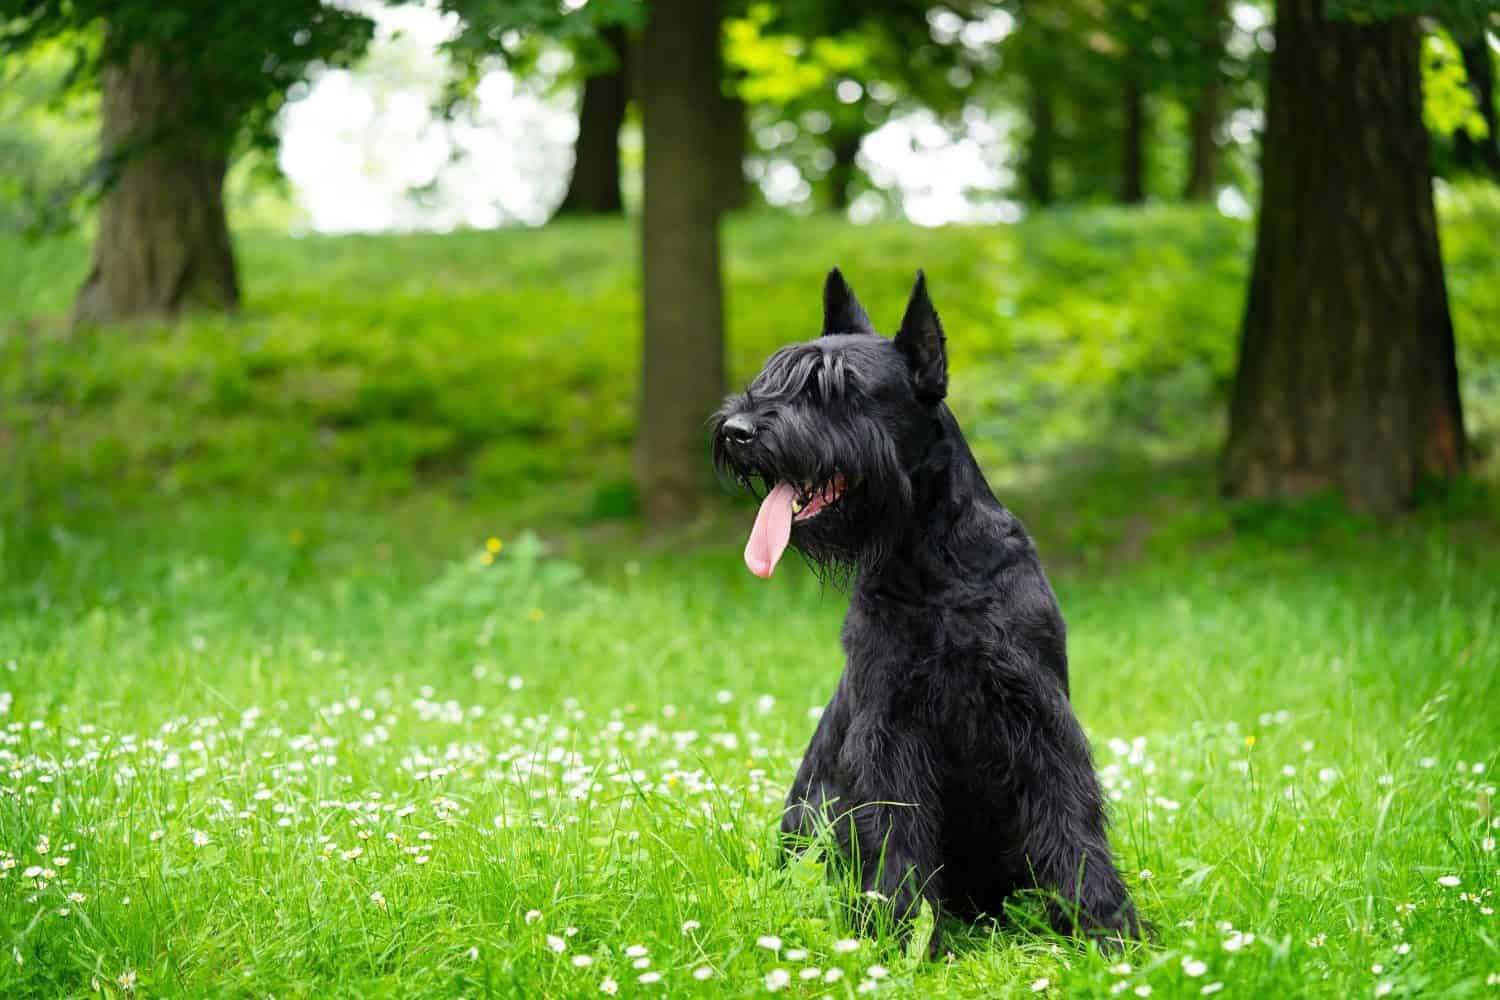  Black giant schnauzer sits in the park on the green grass. Copy space